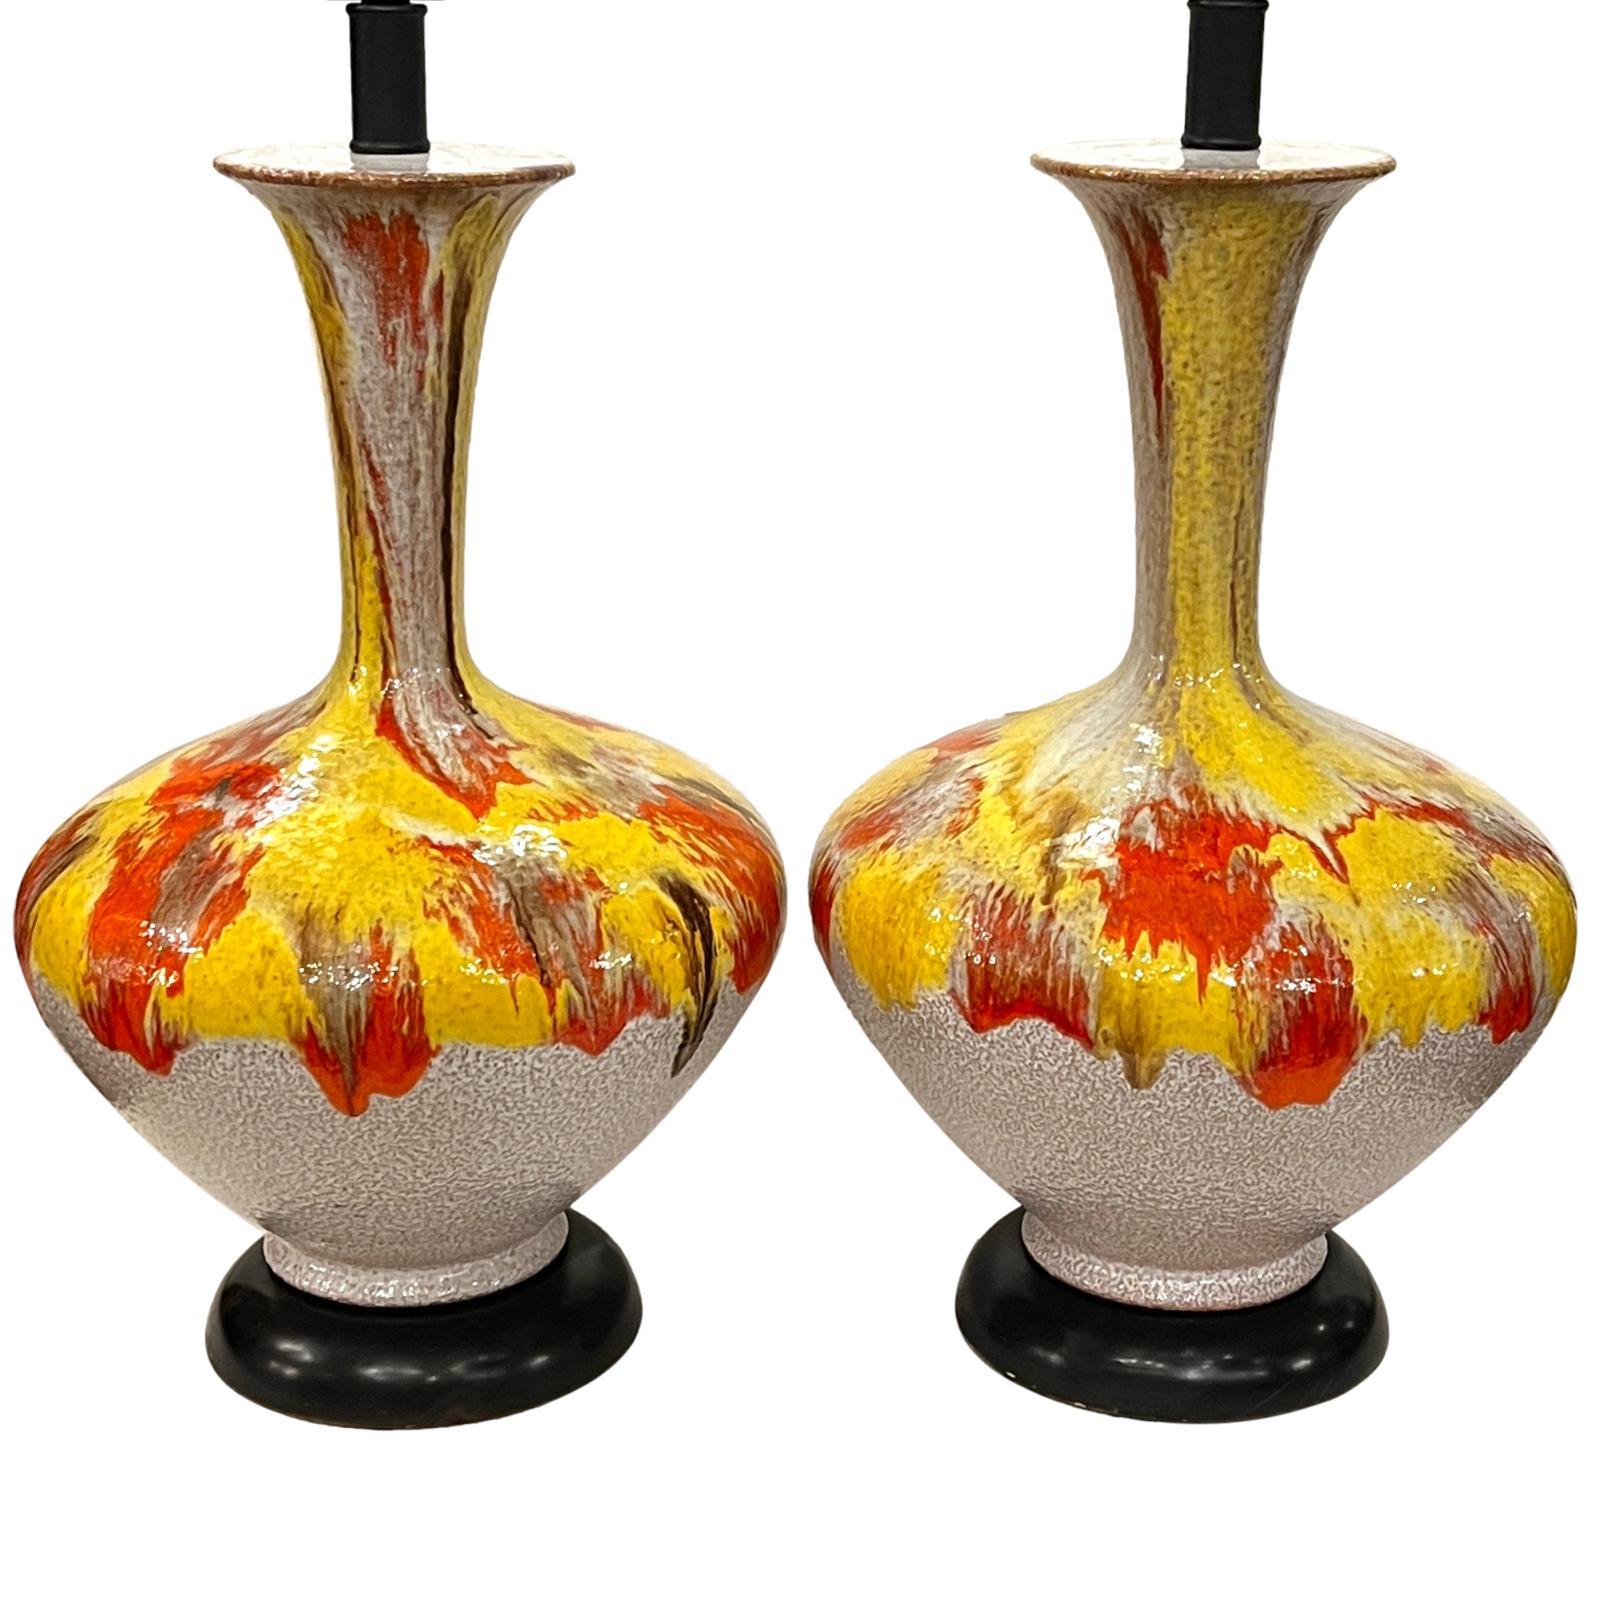 Pair of circa 1960's Italian porcelain lamps with drip-glaze finish.

Measurements:
Height of body: 20